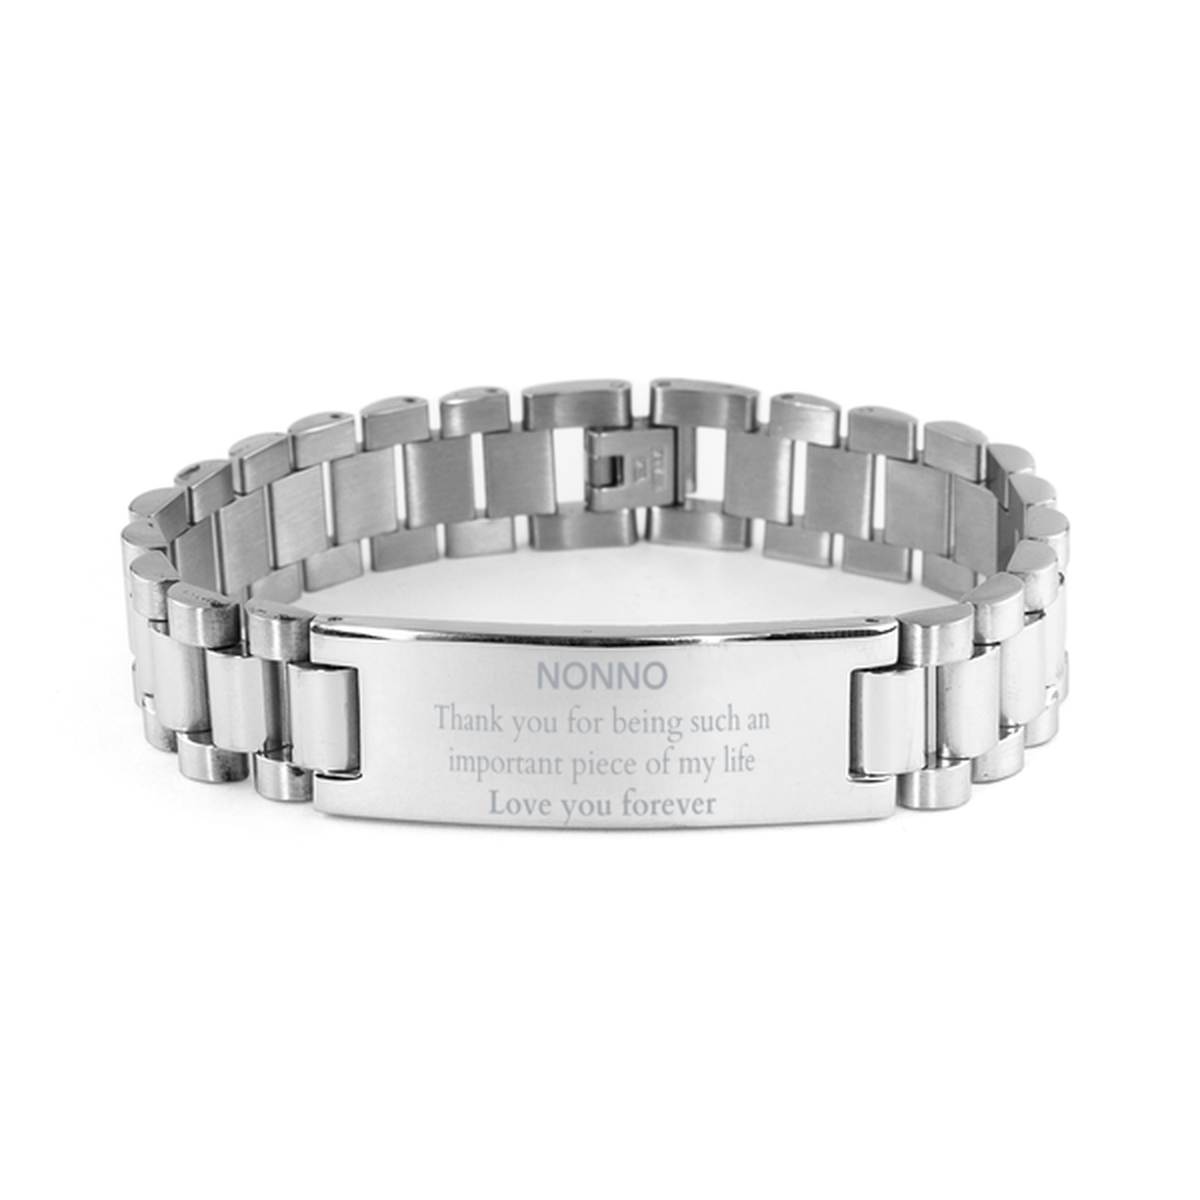 Appropriate Nonno Ladder Stainless Steel Bracelet Epic Birthday Gifts for Nonno Thank you for being such an important piece of my life Nonno Christmas Mothers Fathers Day